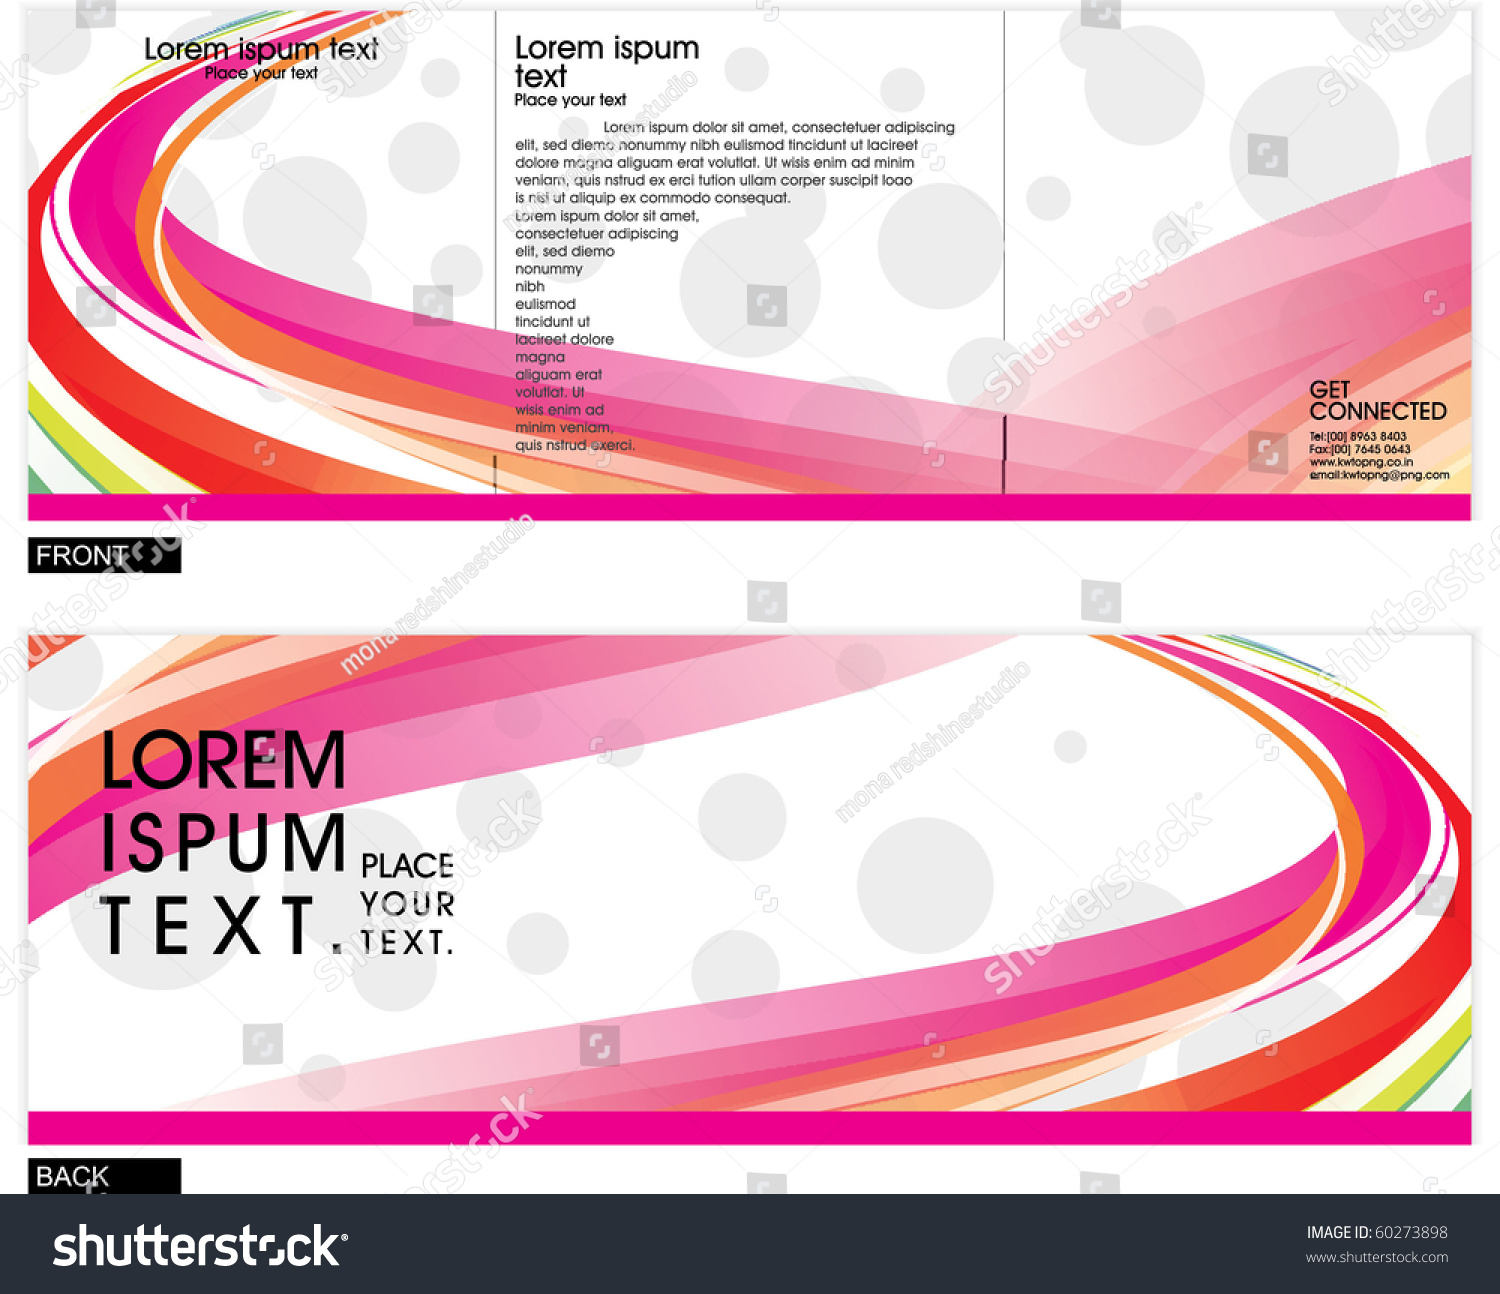 Abstract Composition Vector Background ,Vector Illustration - 60273898